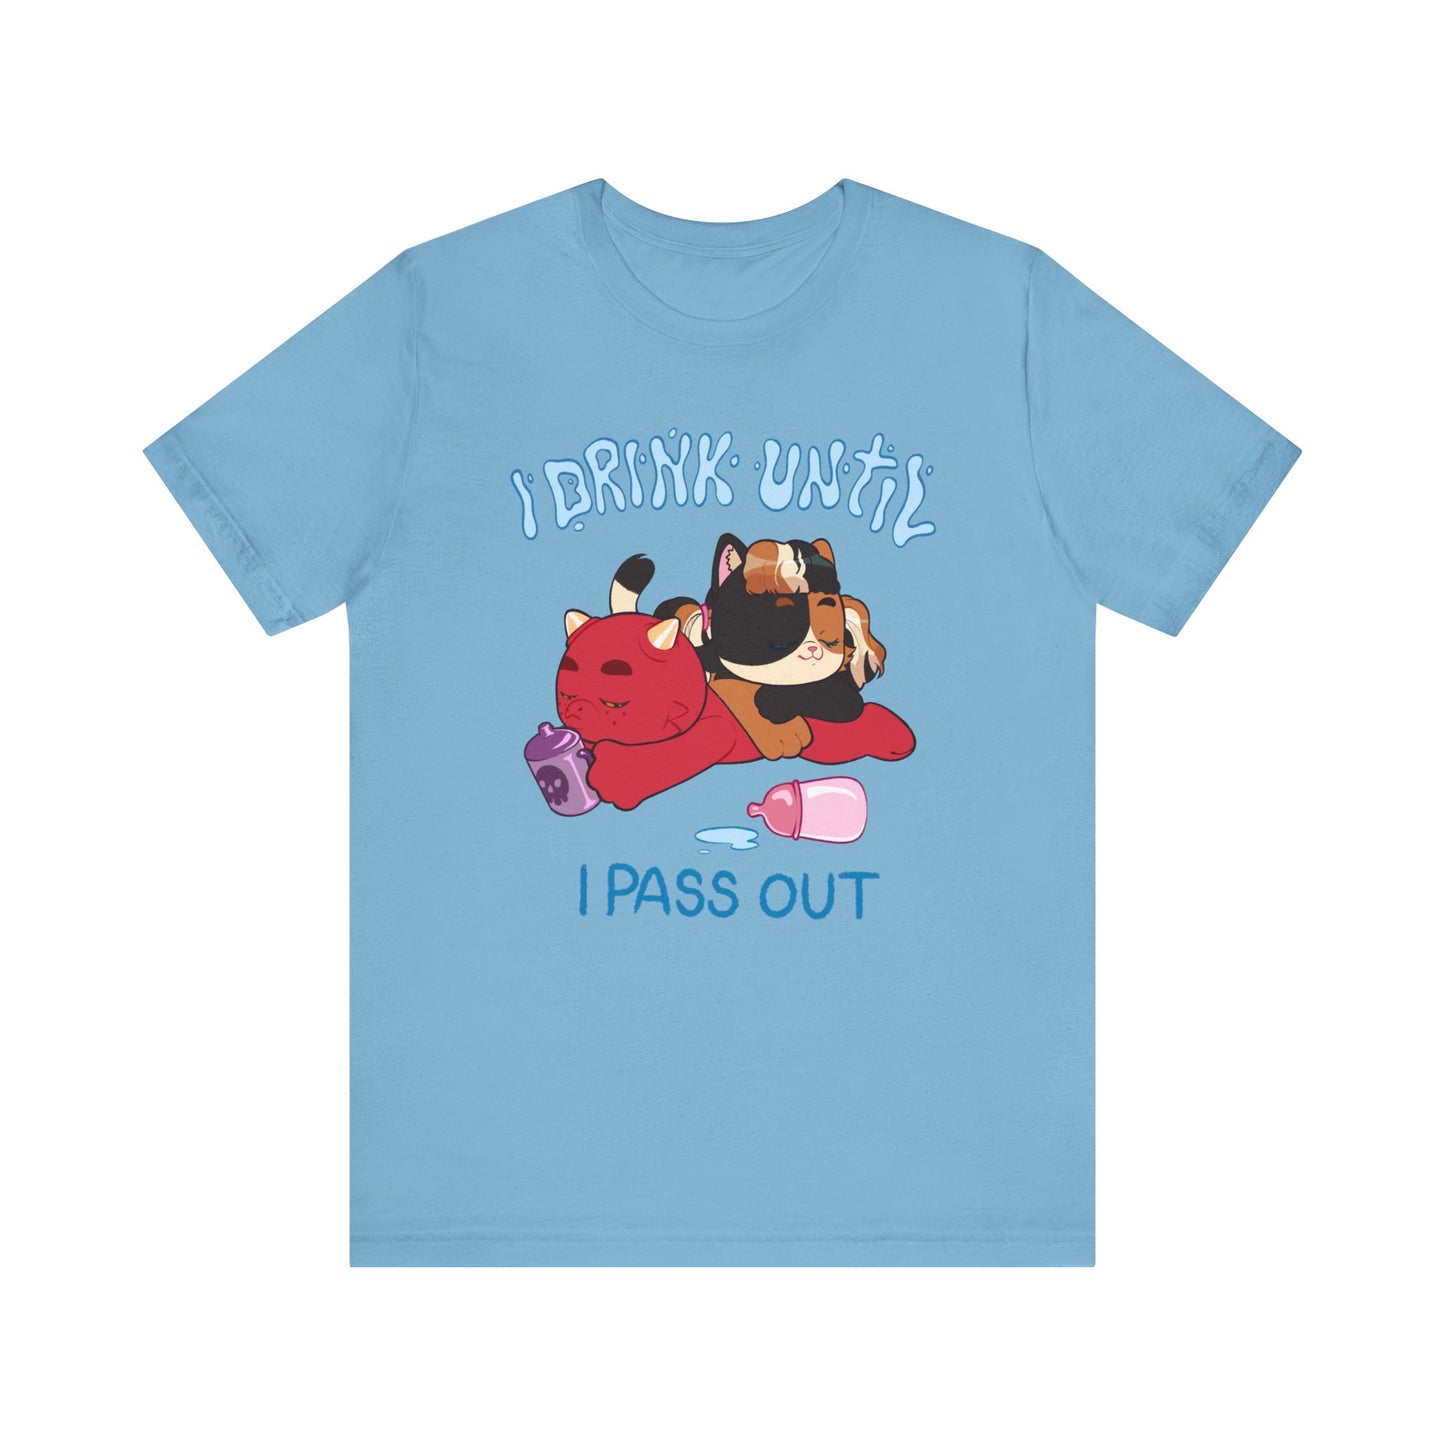 I Drink Until I Pass Out T-shirt